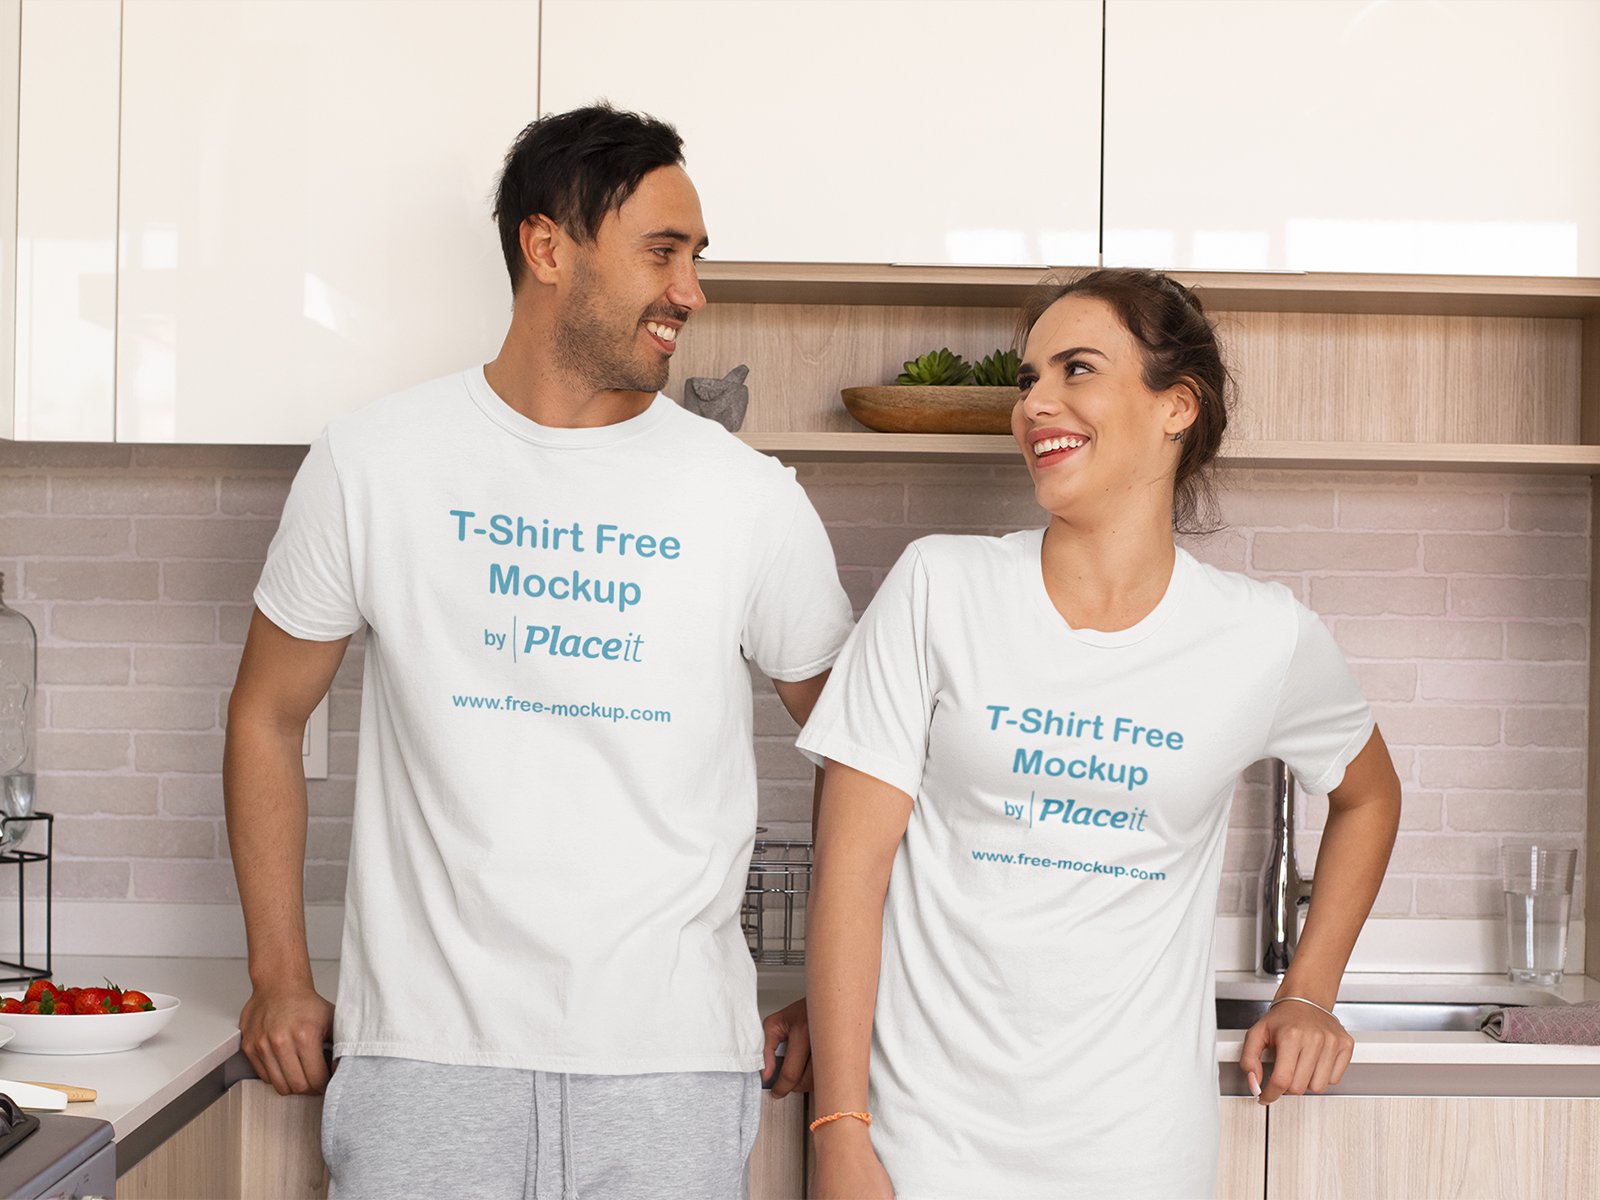 Download T Shirt And Night Dress Placeit Mockup Of A Couple In Pajamas At Home Free Mockup